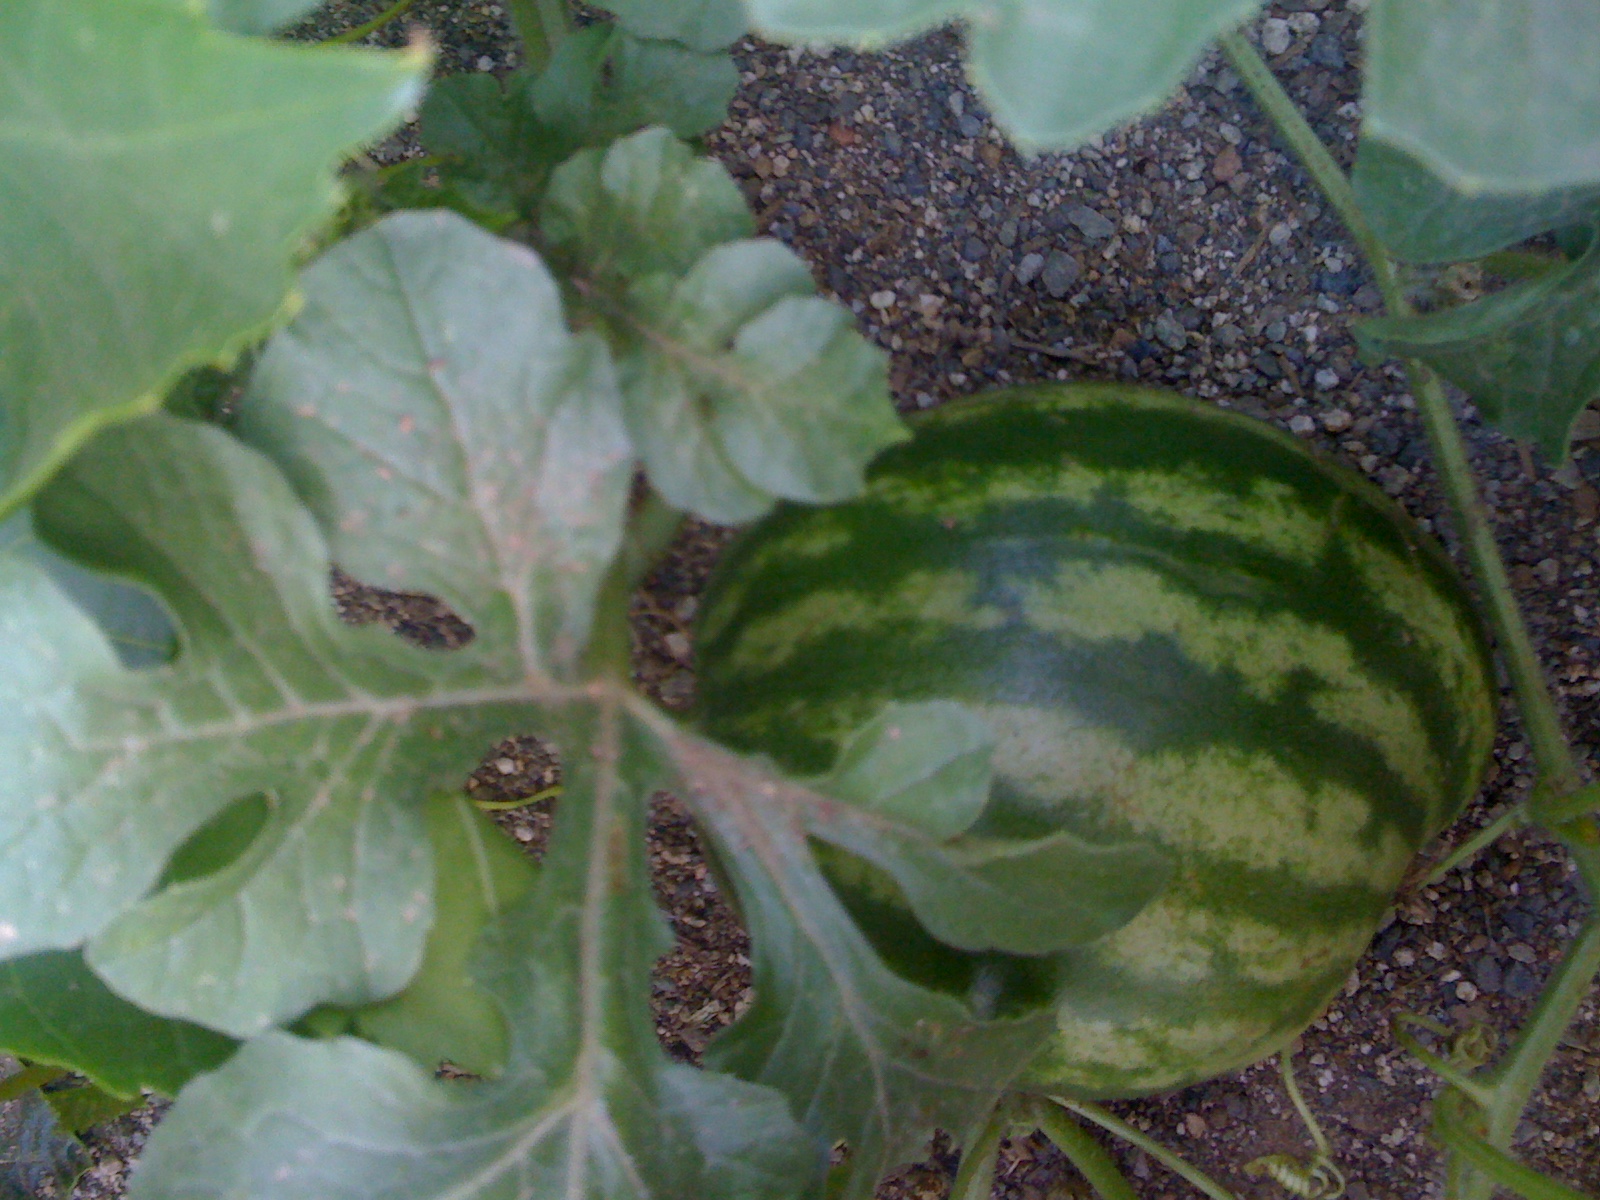 Watermelon grown in homemade compost